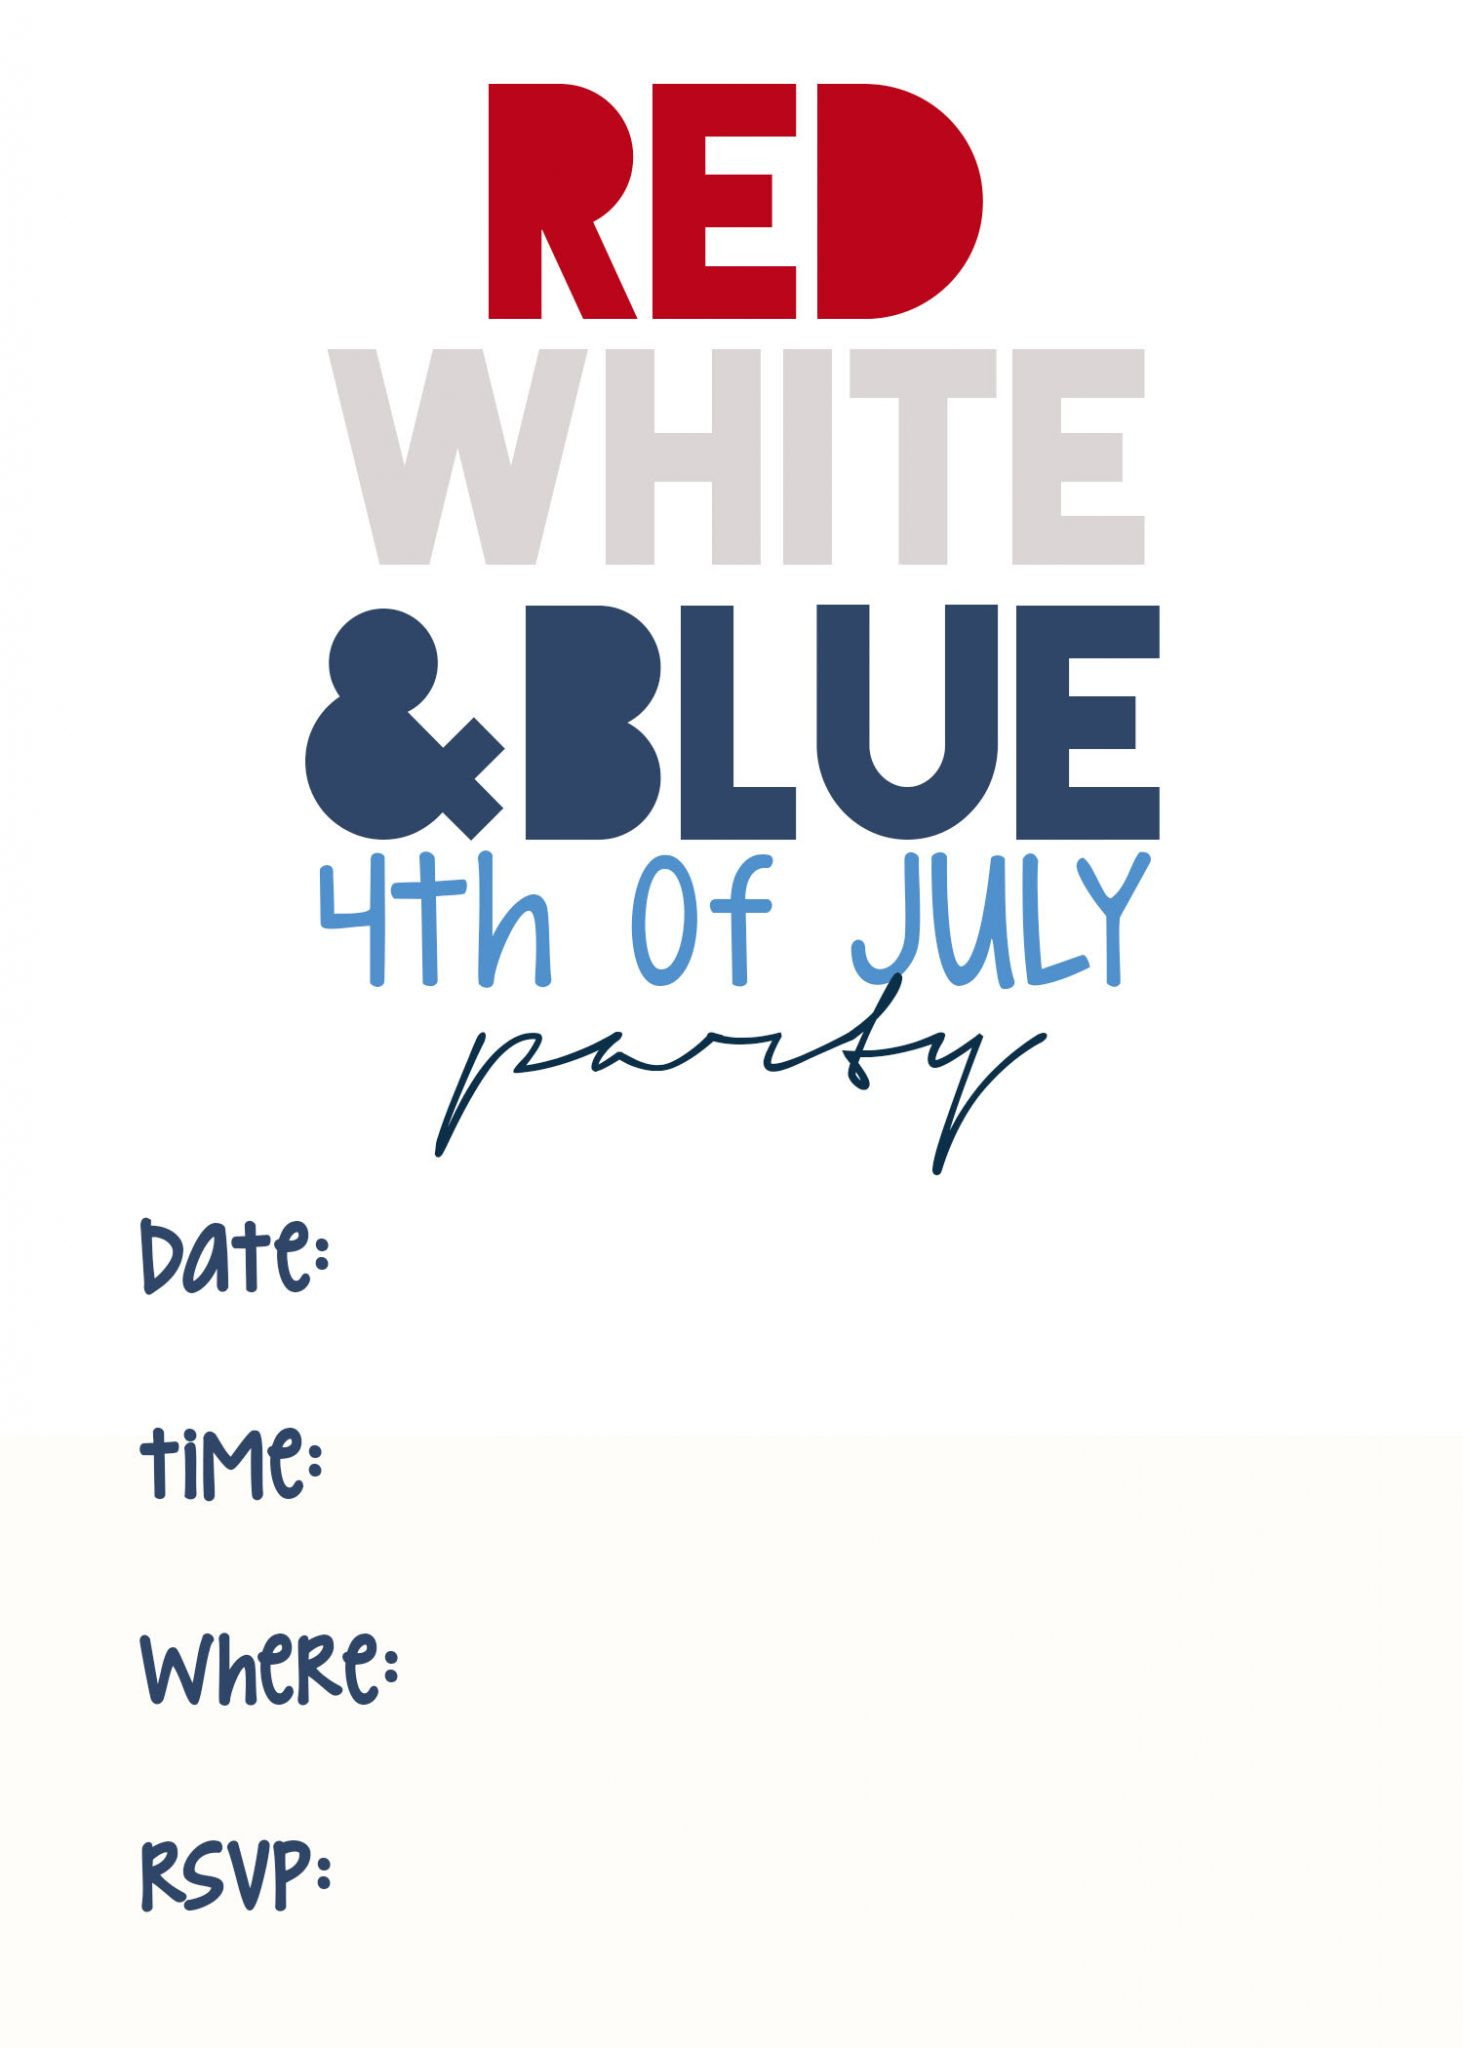 4th Of July Party Invitations
 4th of July Printable Invitations